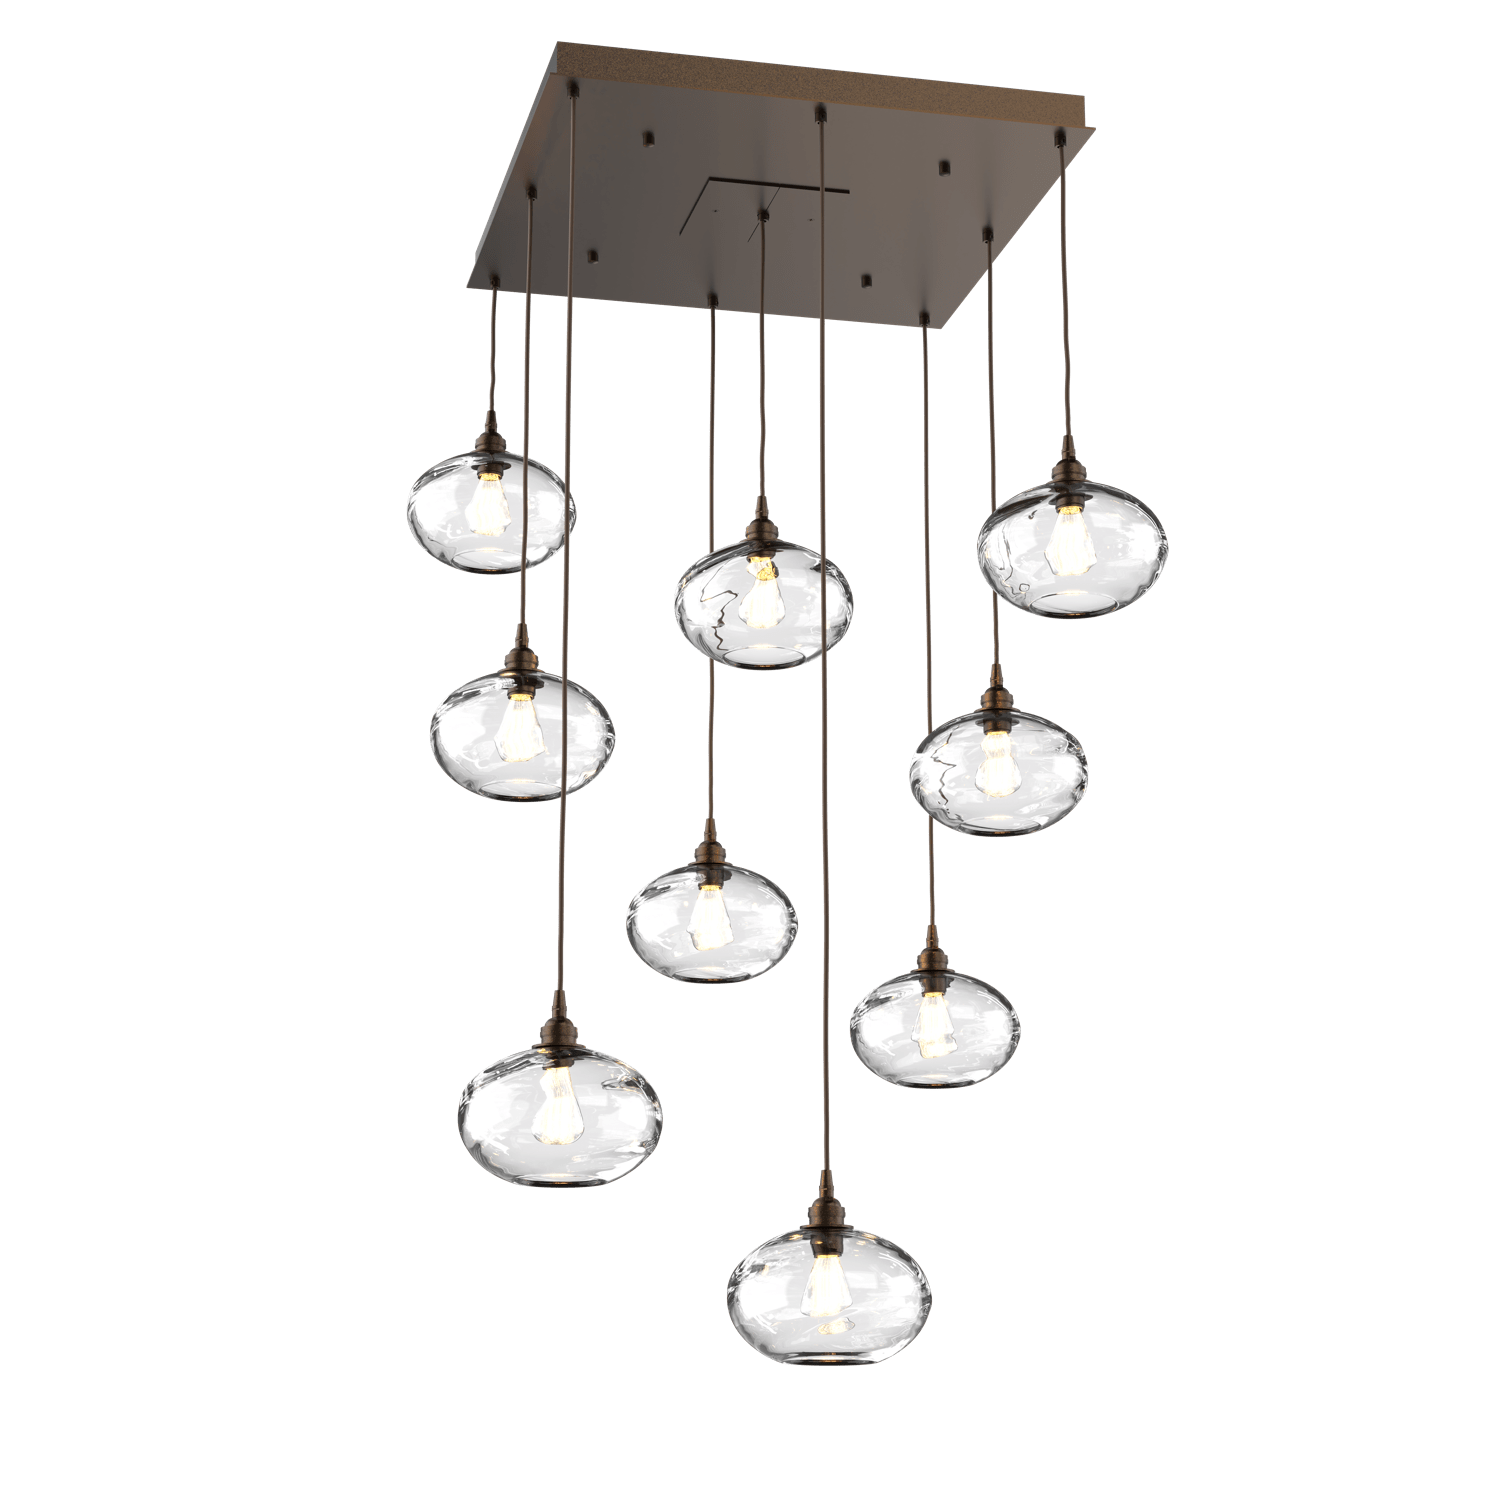 CHB0036-09-FB-OC-Hammerton-Studio-Optic-Blown-Glass-Coppa-9-light-square-pendant-chandelier-with-flat-bronze-finish-and-optic-clear-blown-glass-shades-and-incandescent-lamping